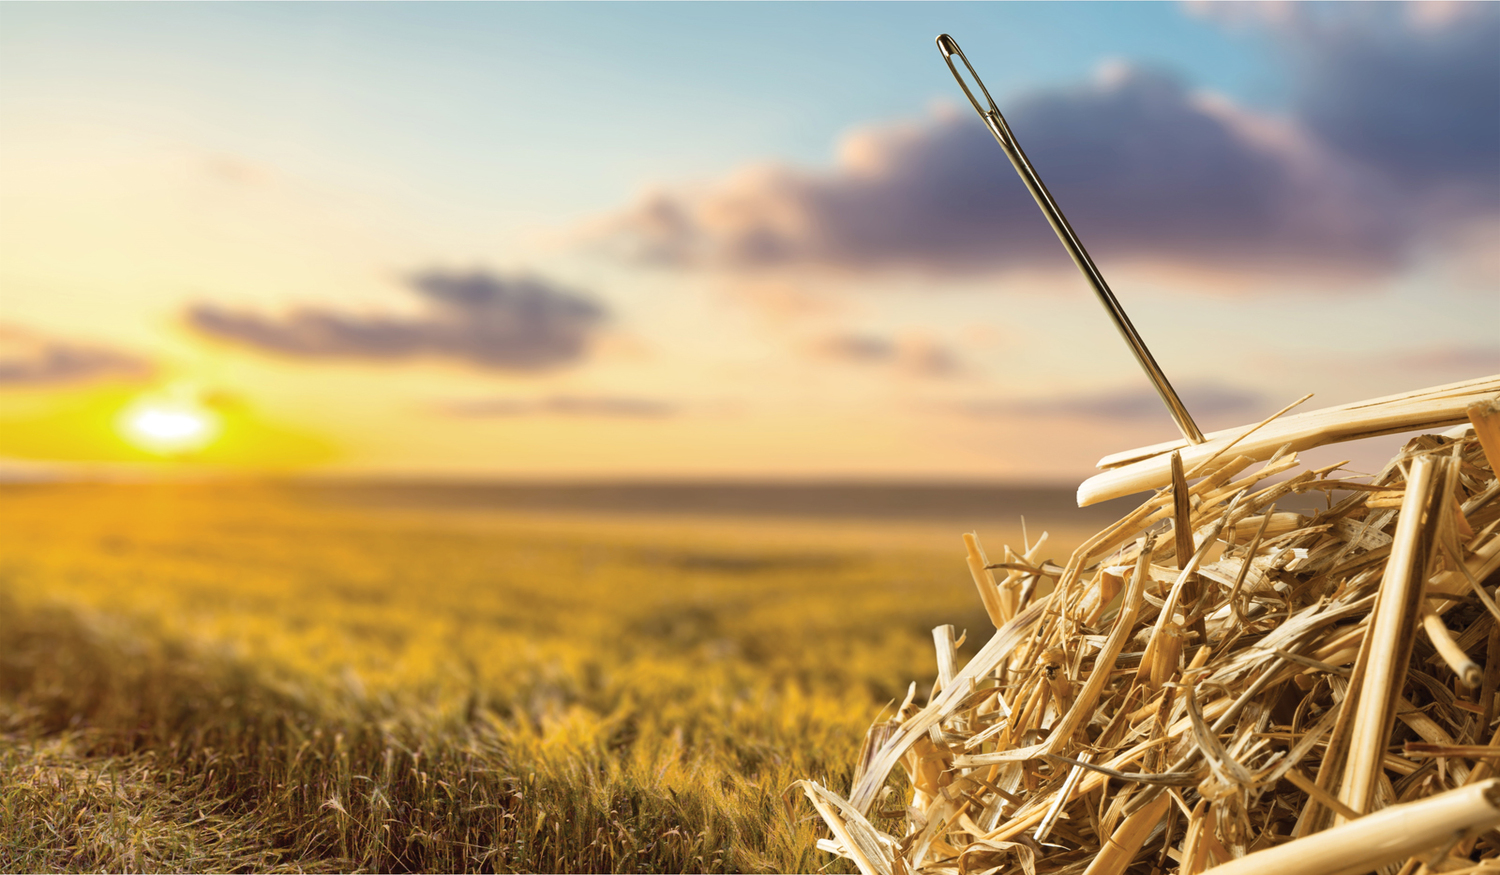 A needle in a haystack in front of an open field